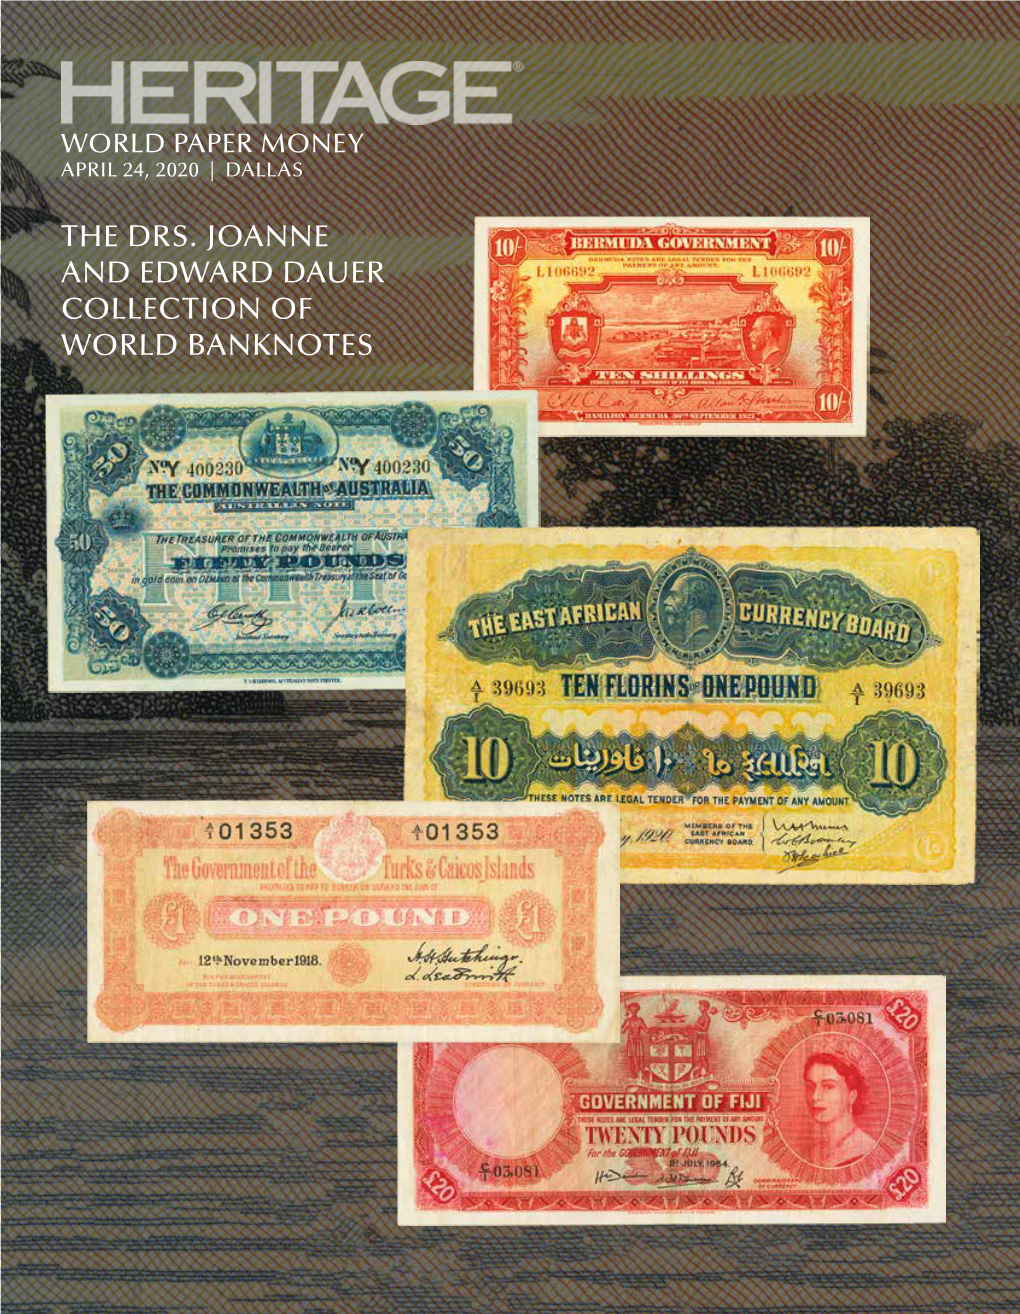 The Drs. Joanne and Edward Dauer Collection of World Banknotes